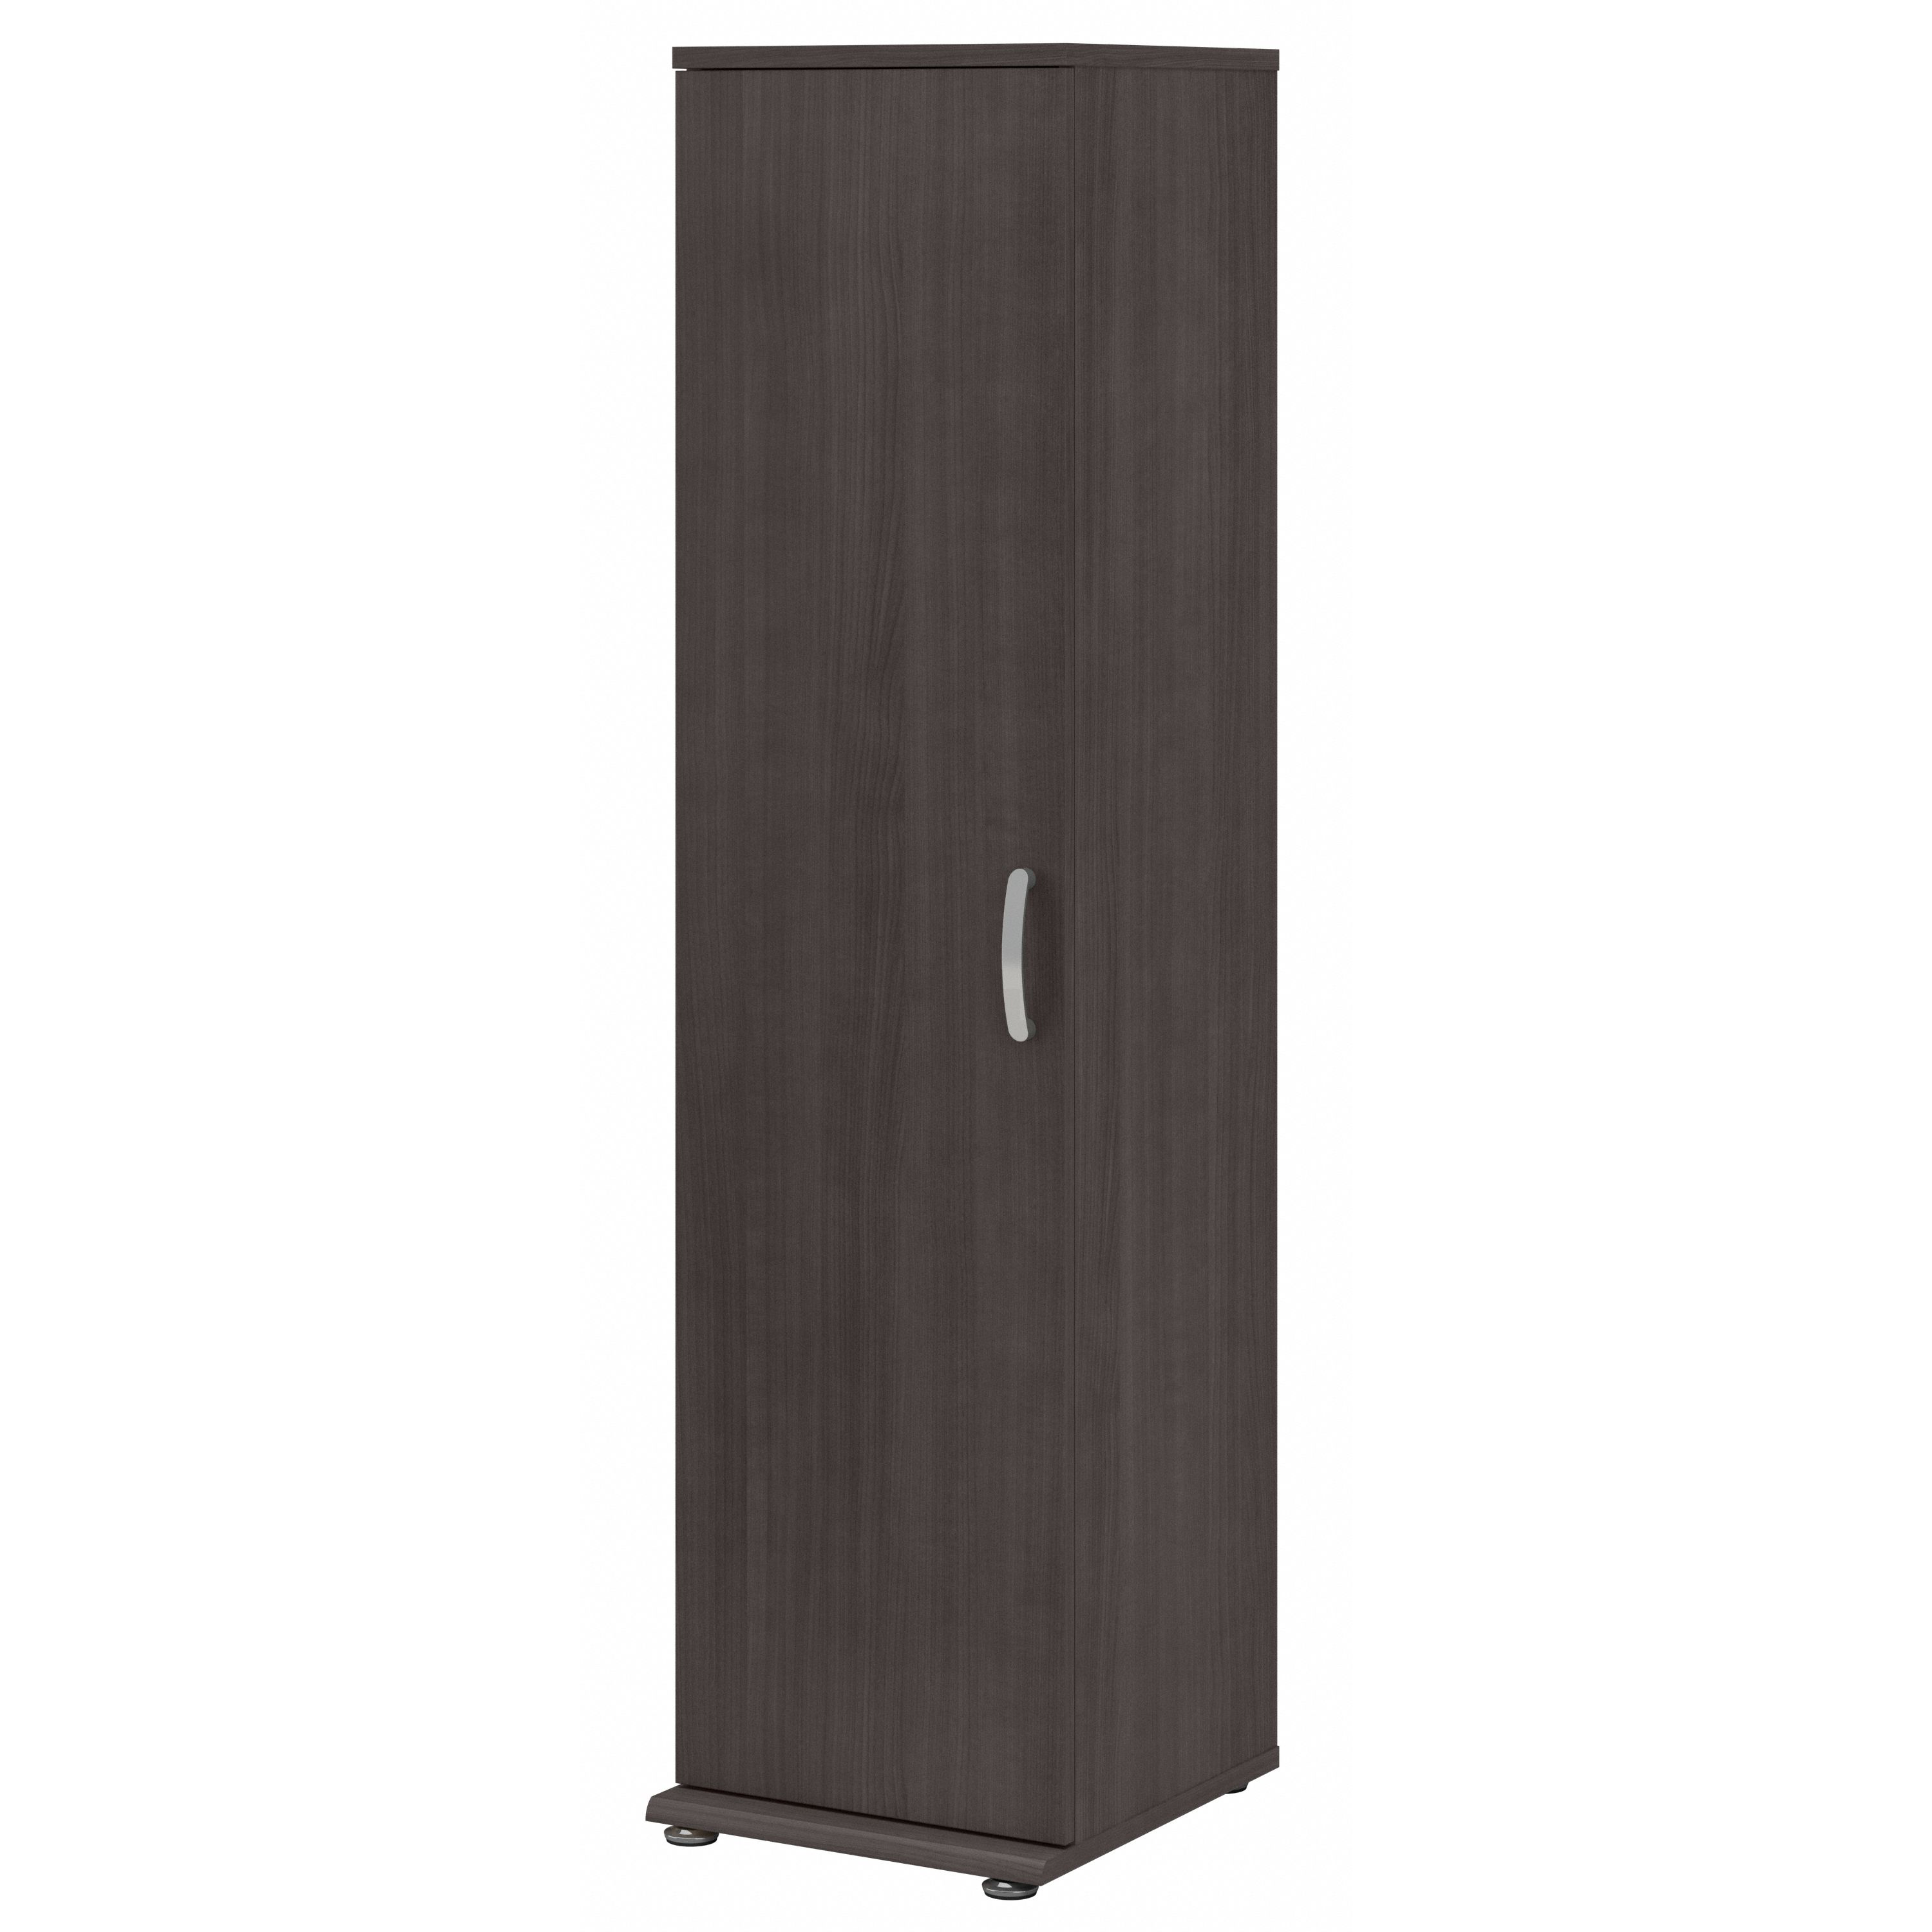 Shop Bush Business Furniture Universal Tall Narrow Storage Cabinet with Door and Shelves 02 UNS116SG #color_storm gray